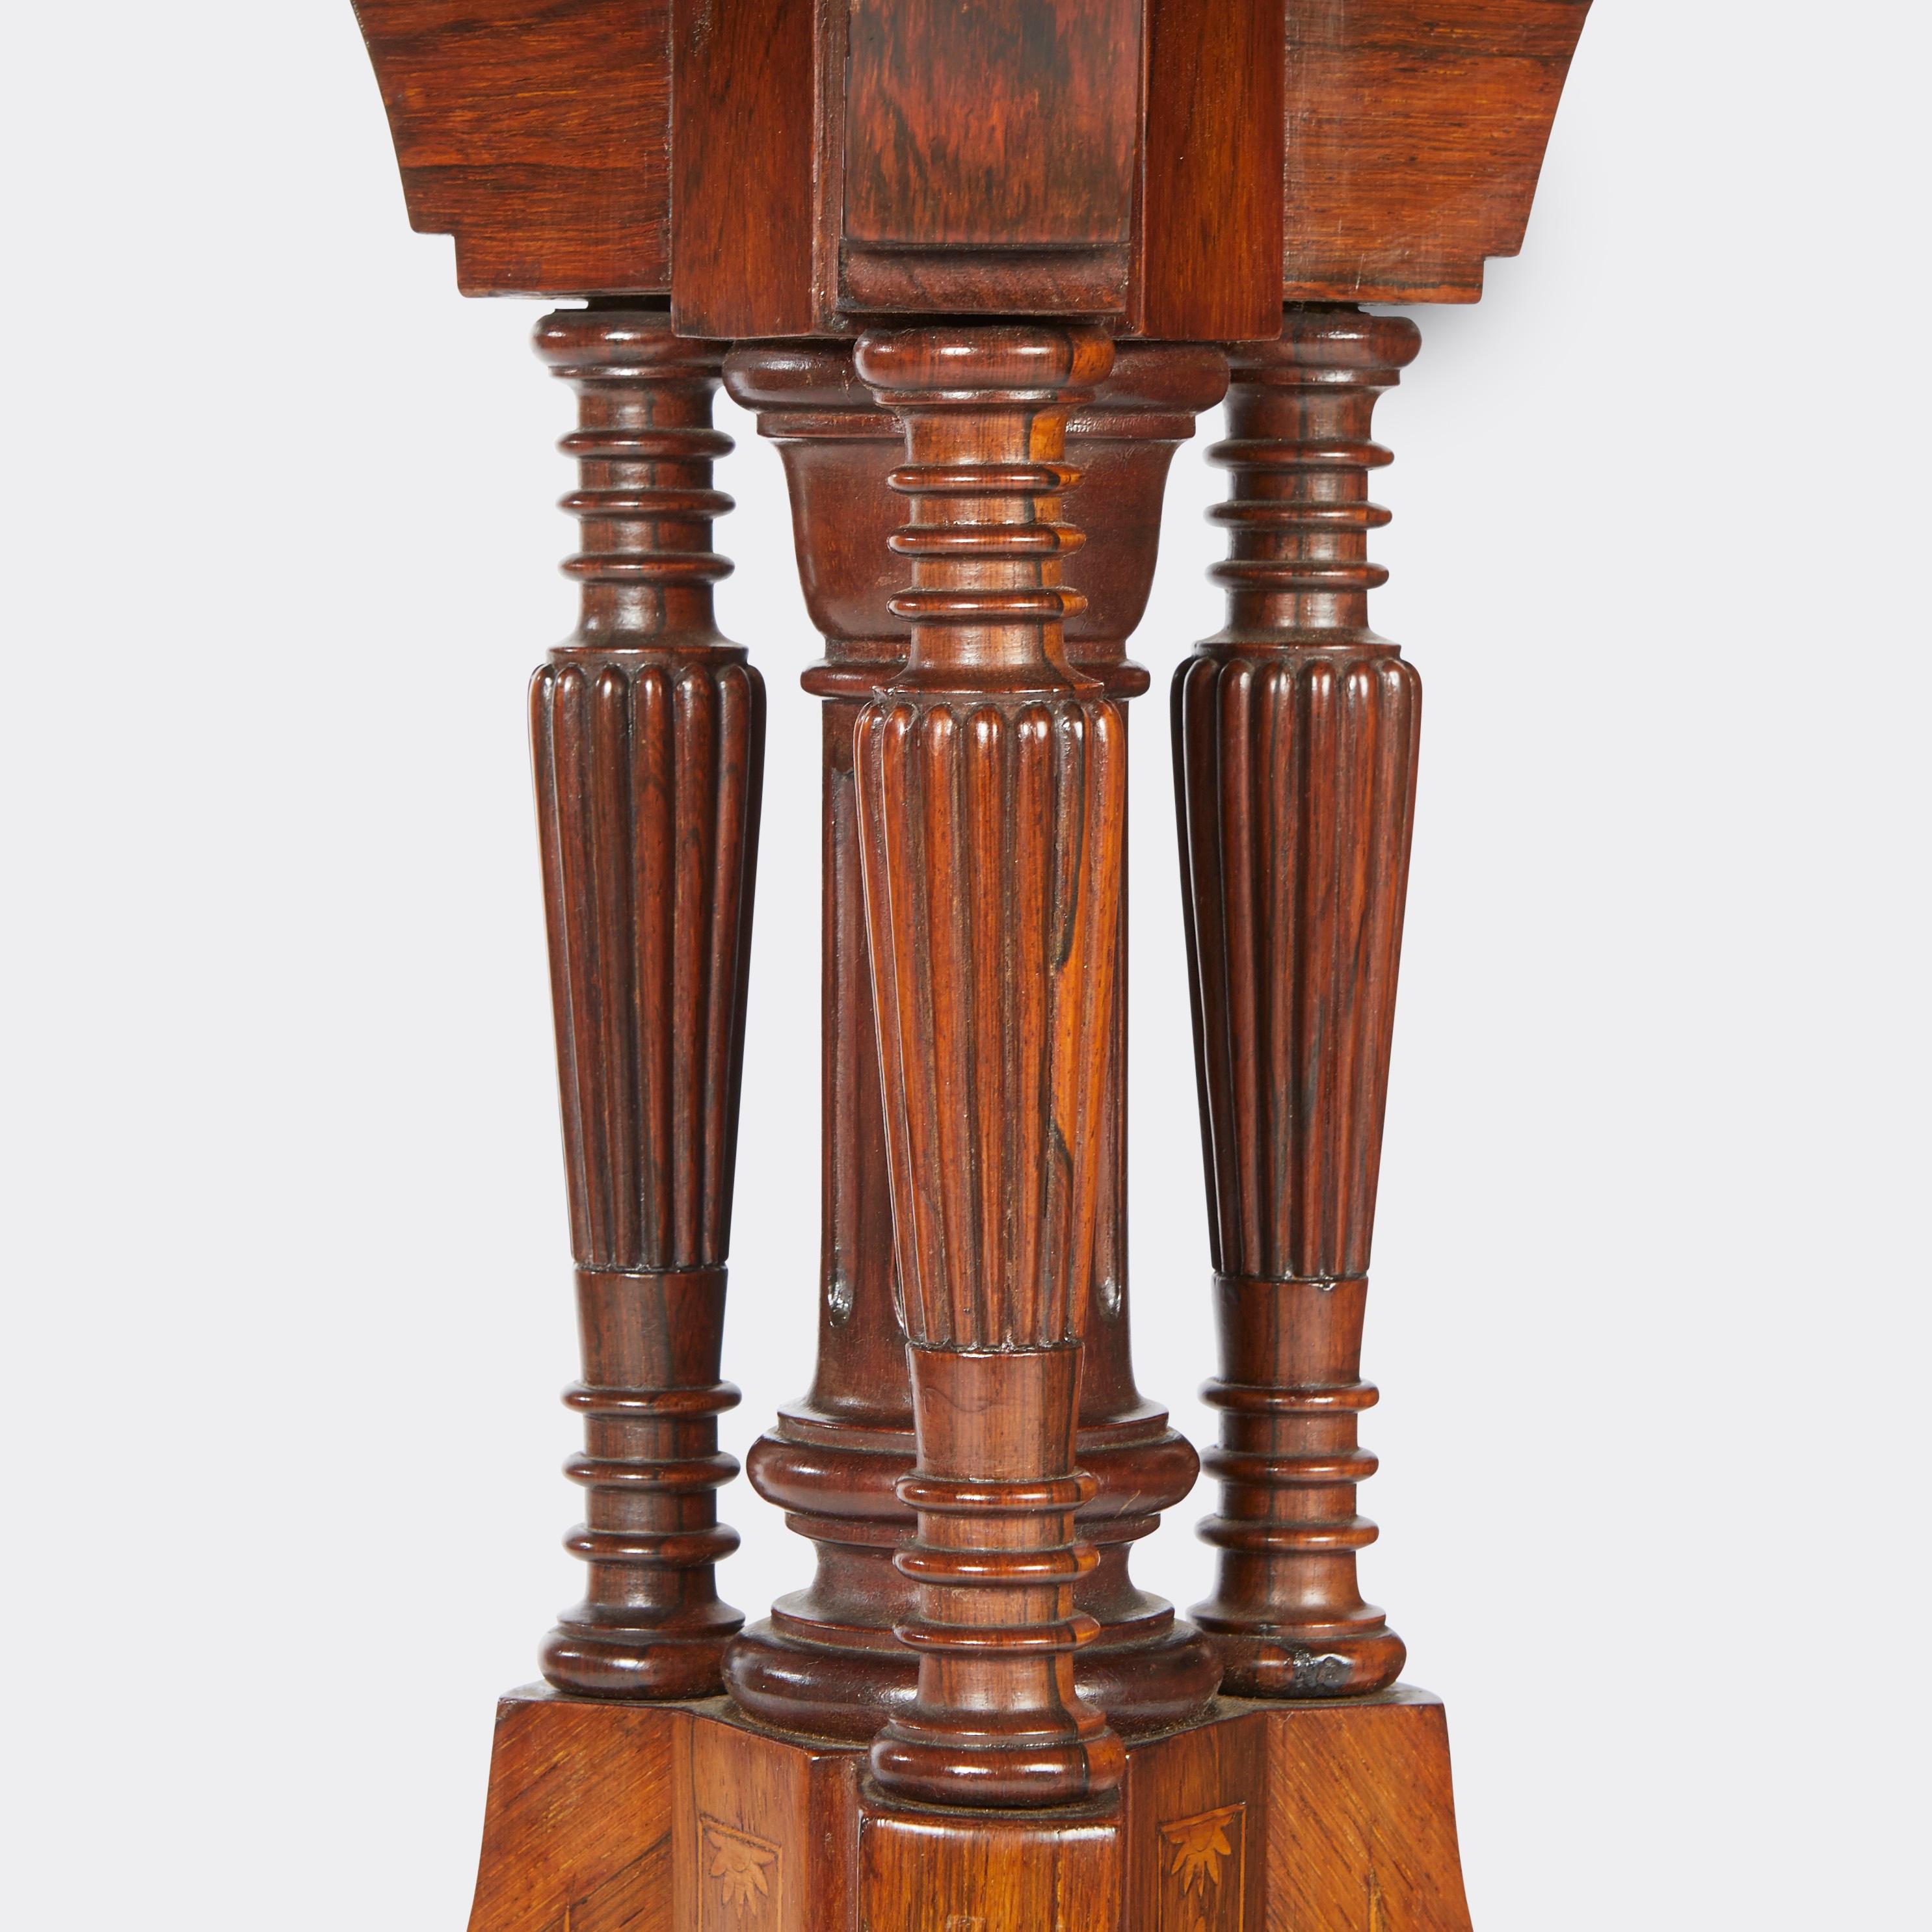 North American 19th Century Aesthetic Movement Rosewood Side Table